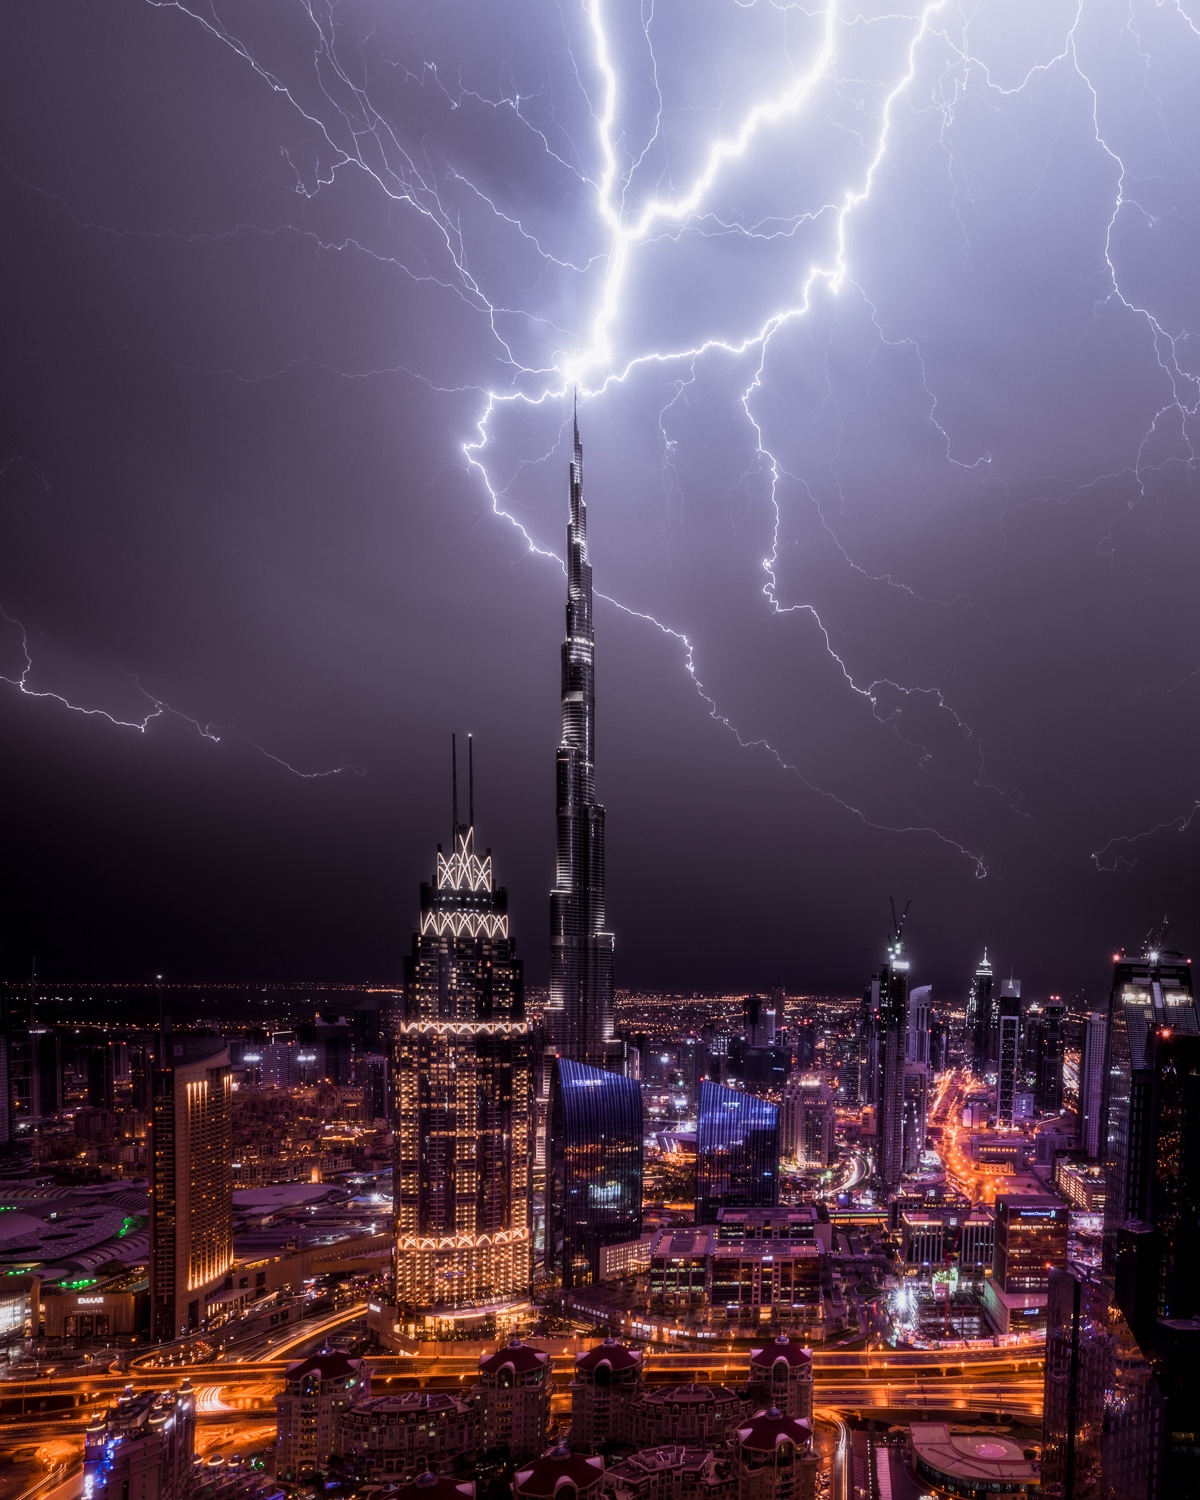 Incredible Cityscapes of Dubai and Singapore in the Midst of Lightning